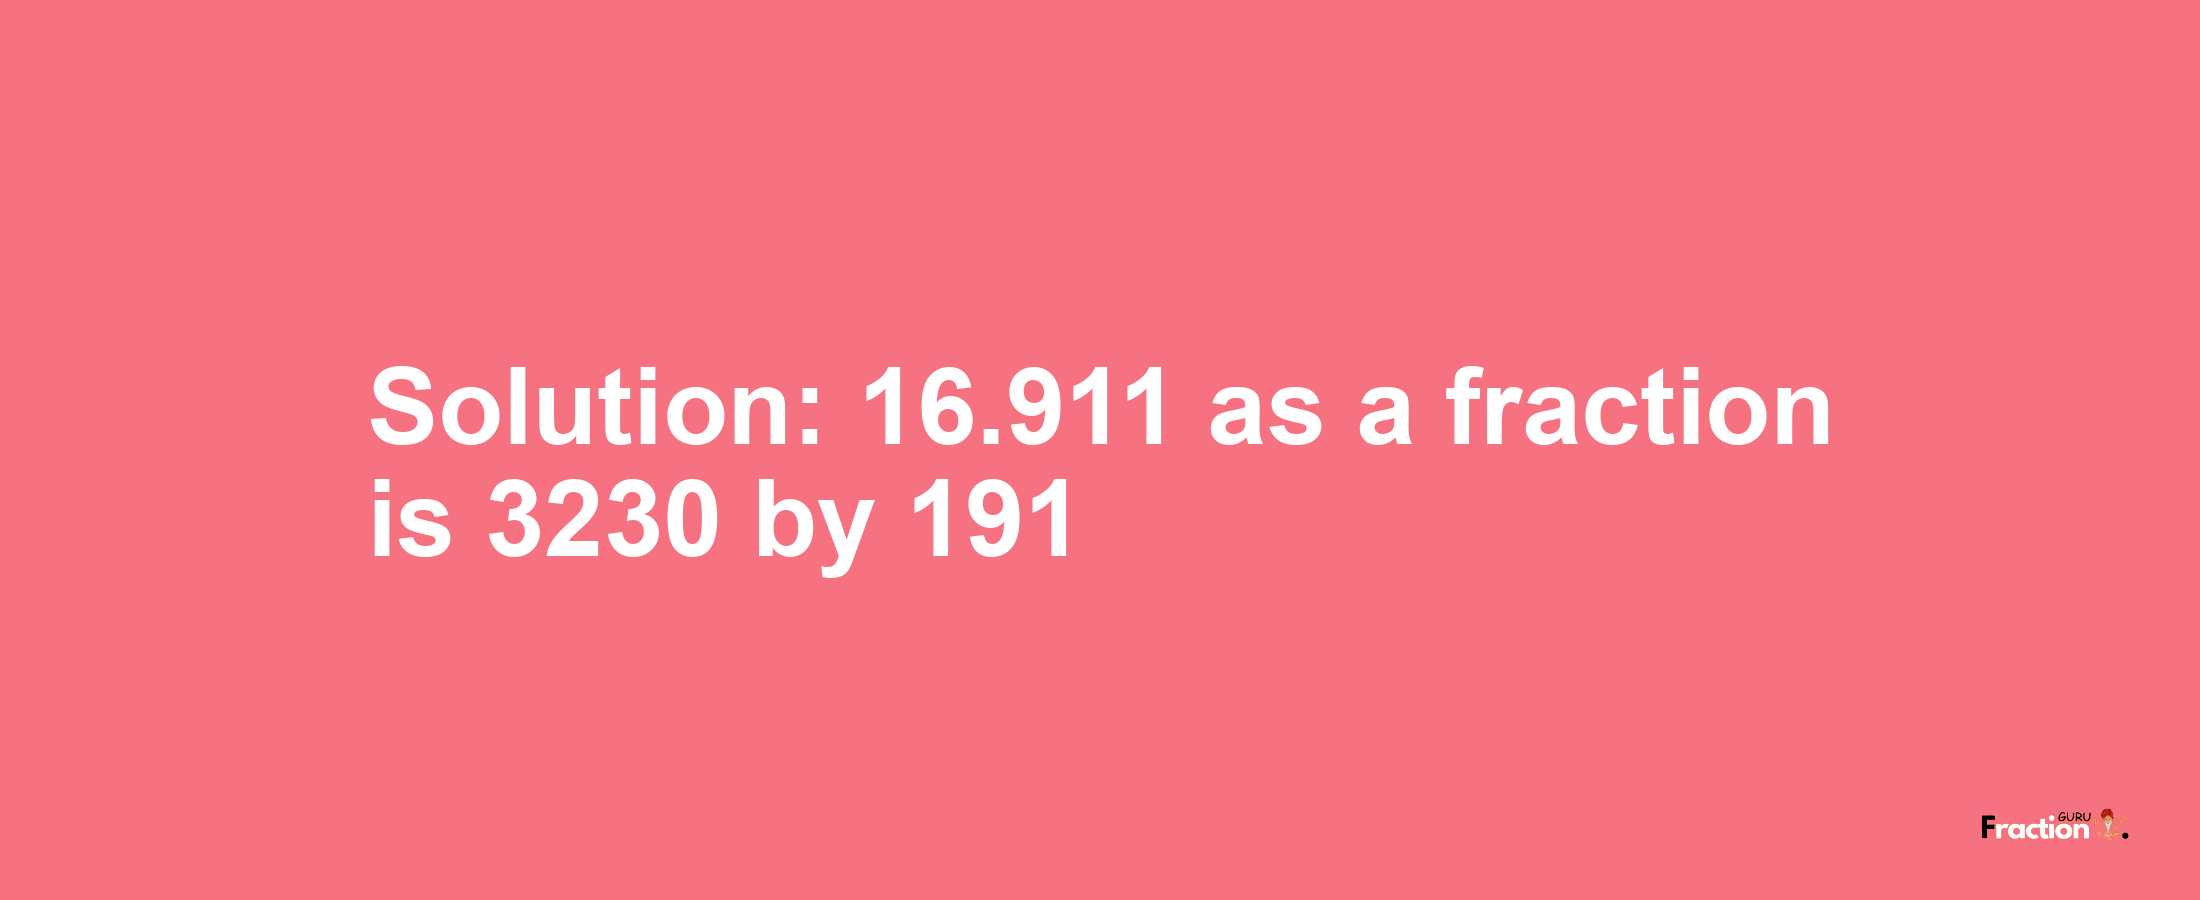 Solution:16.911 as a fraction is 3230/191